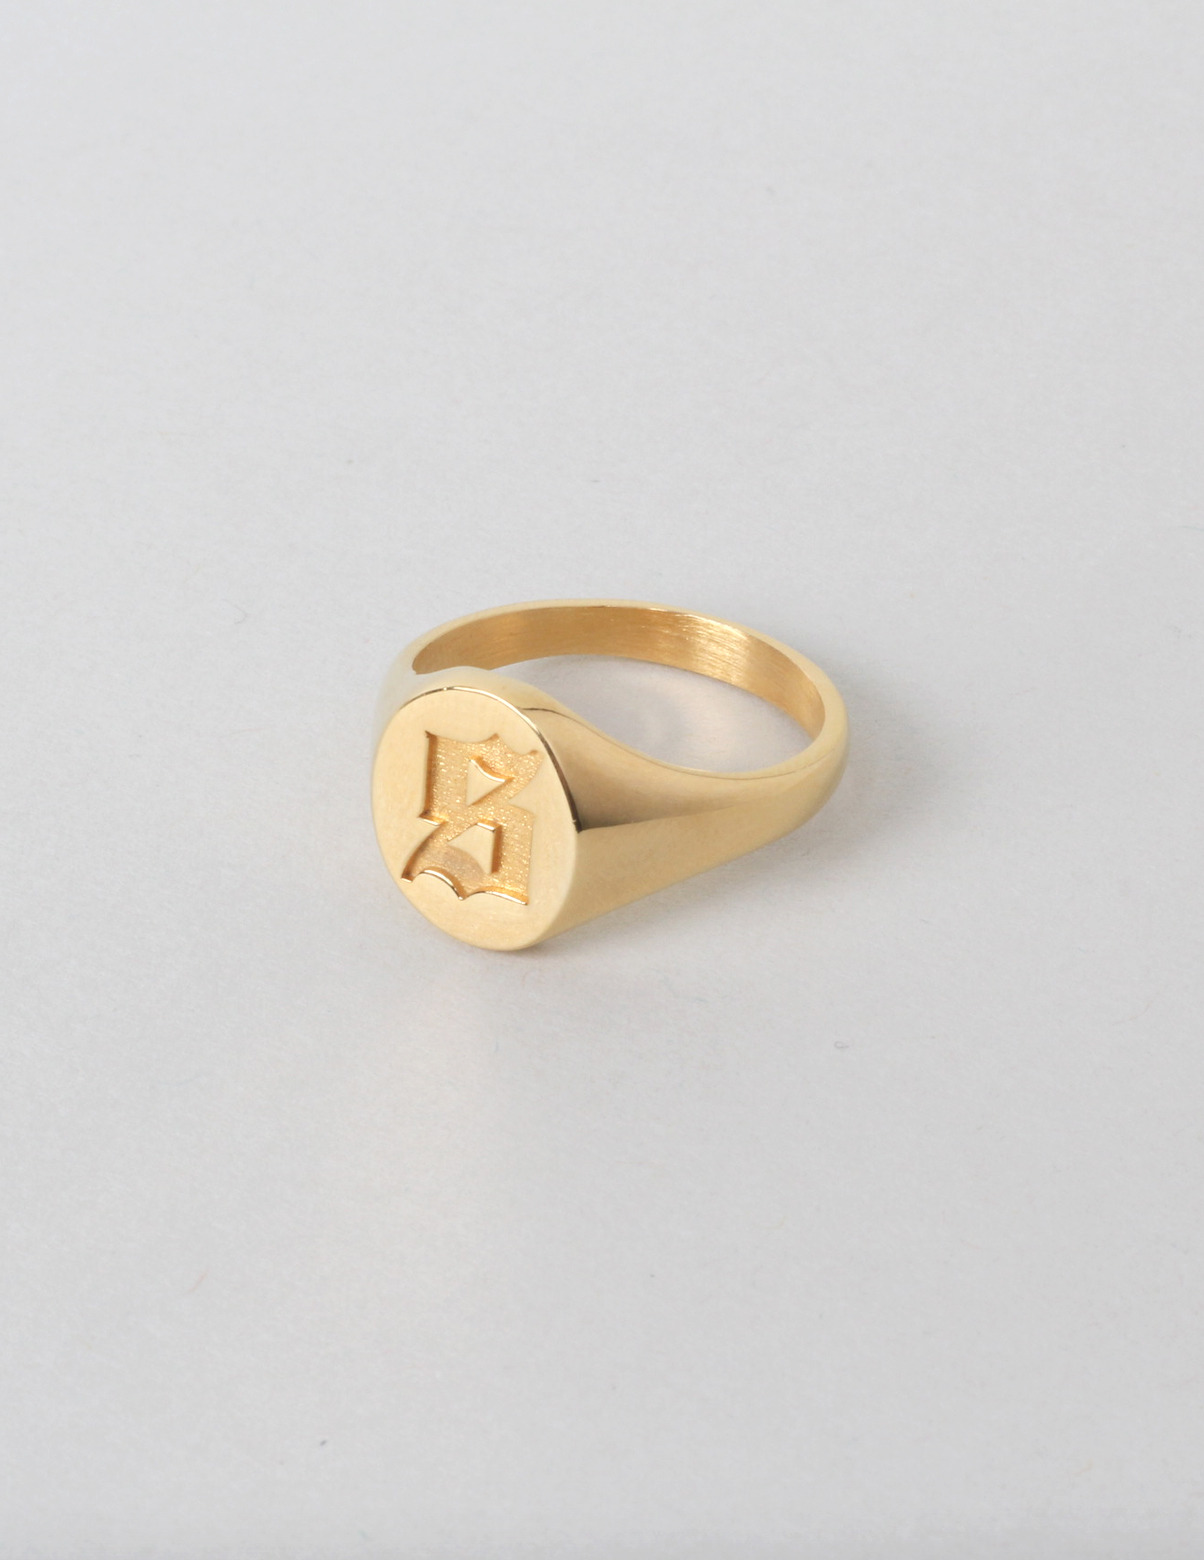 Set S Signet Ring (Gold)Set Store Exclusive www.setstore.co.uk/product ...